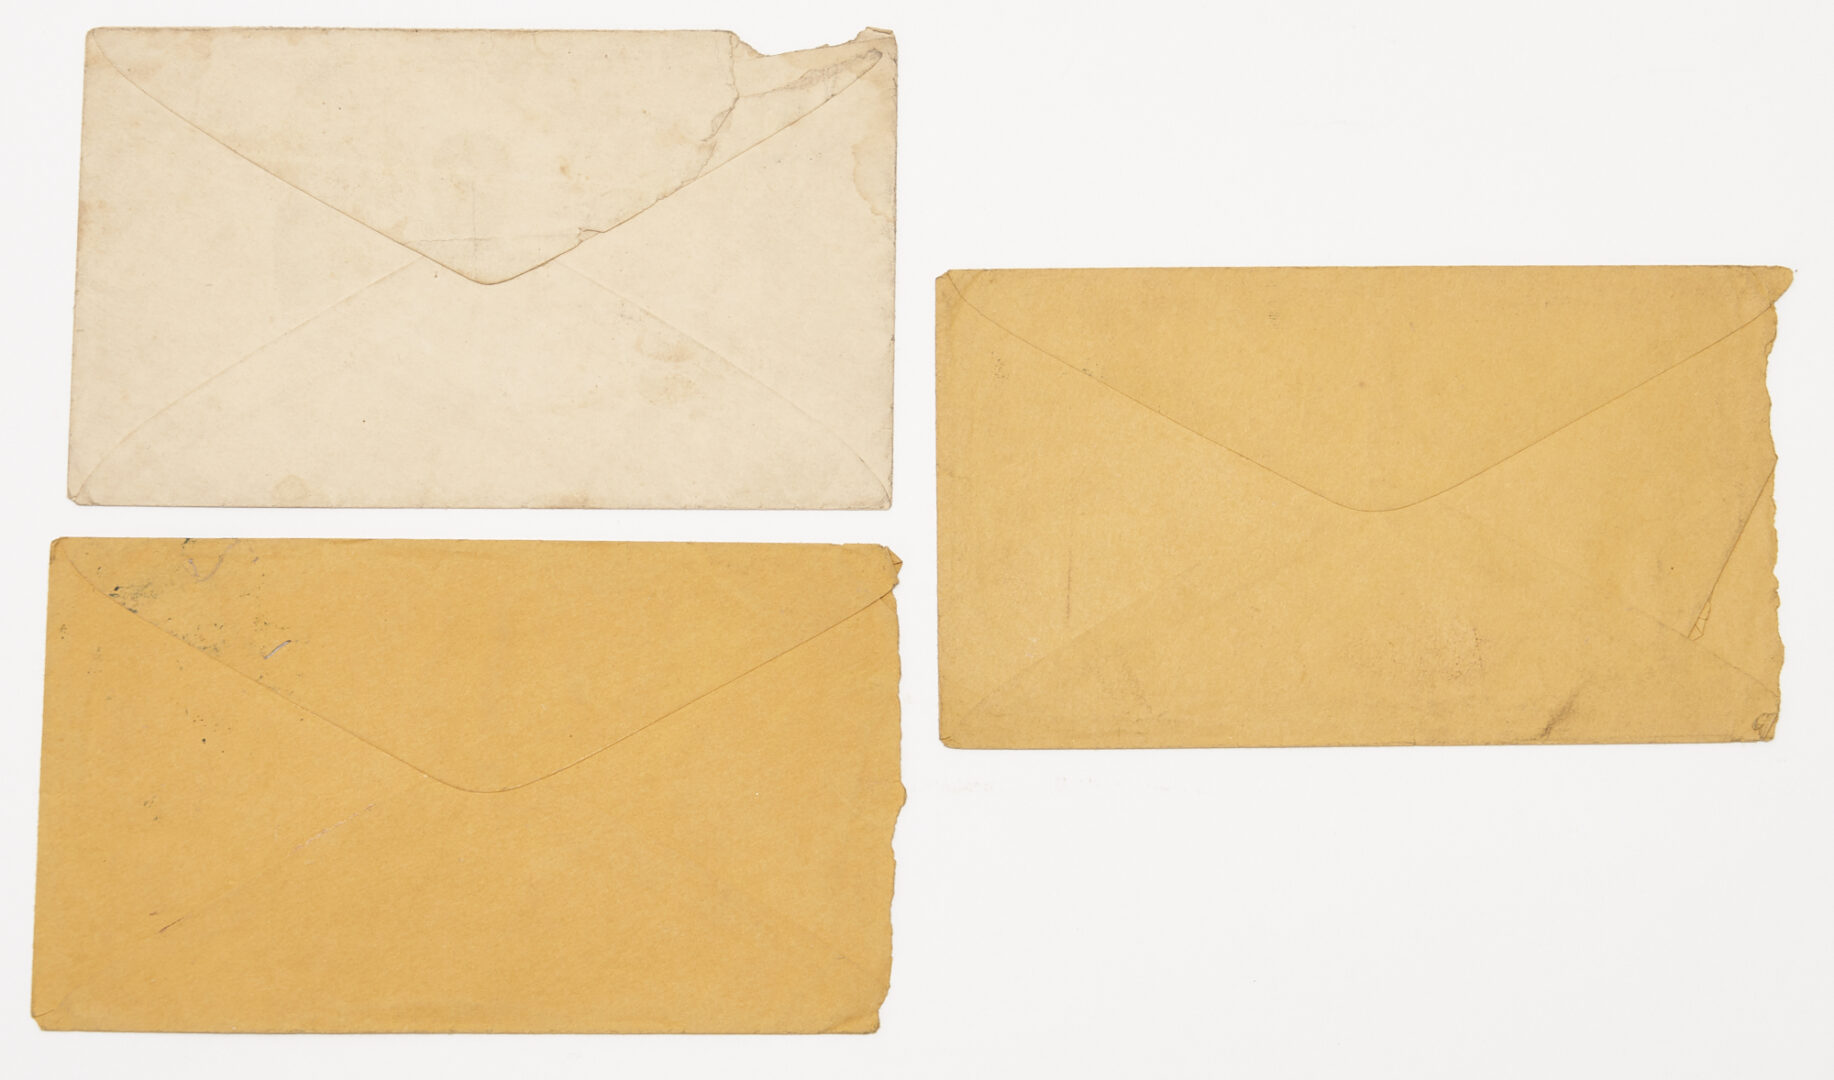 Lot 584: Collection Civil War Related Envelopes and Covers, 13 items